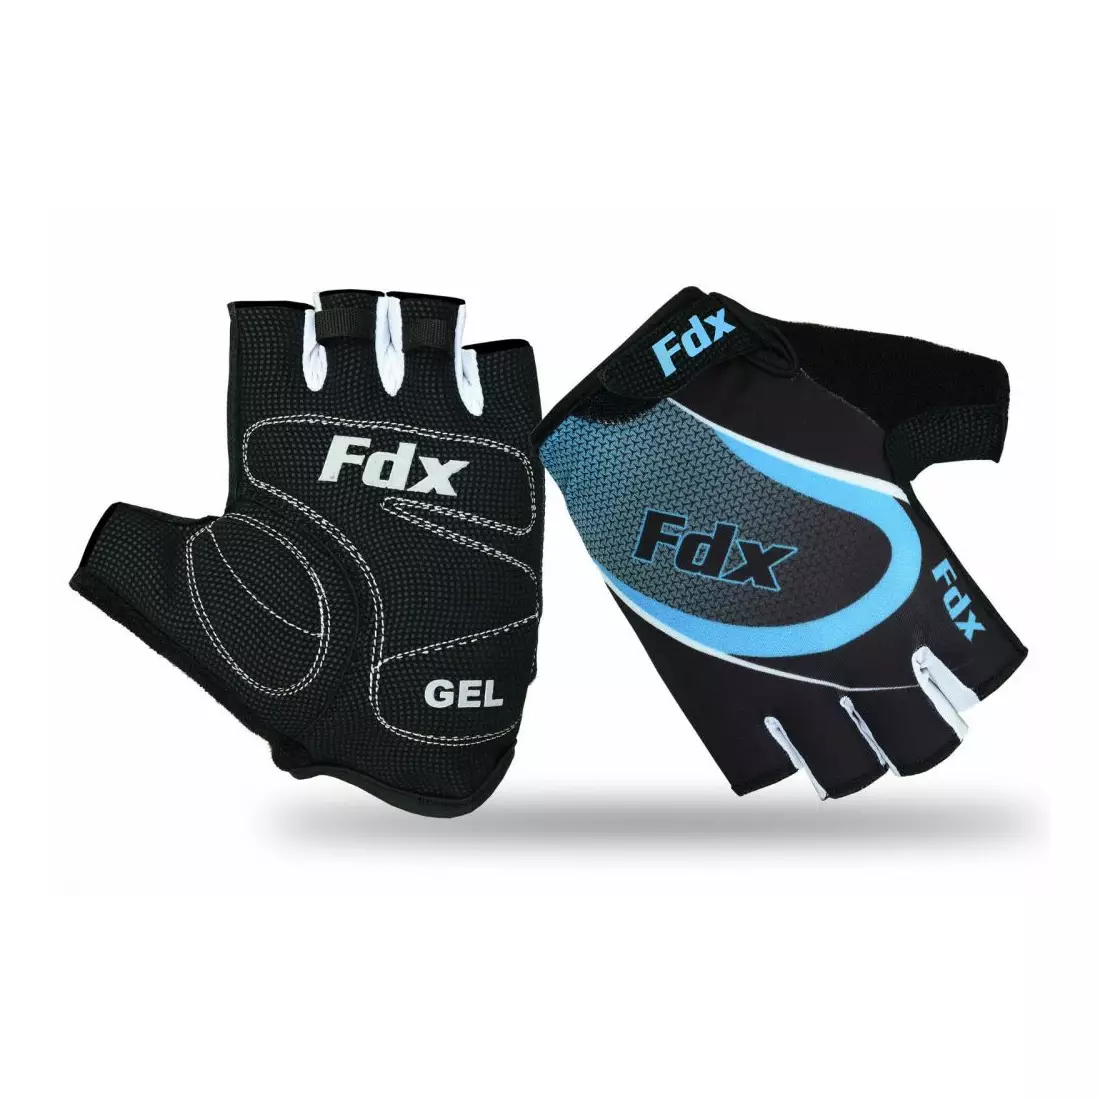 FDX 1010 men's cycling gloves black and blue